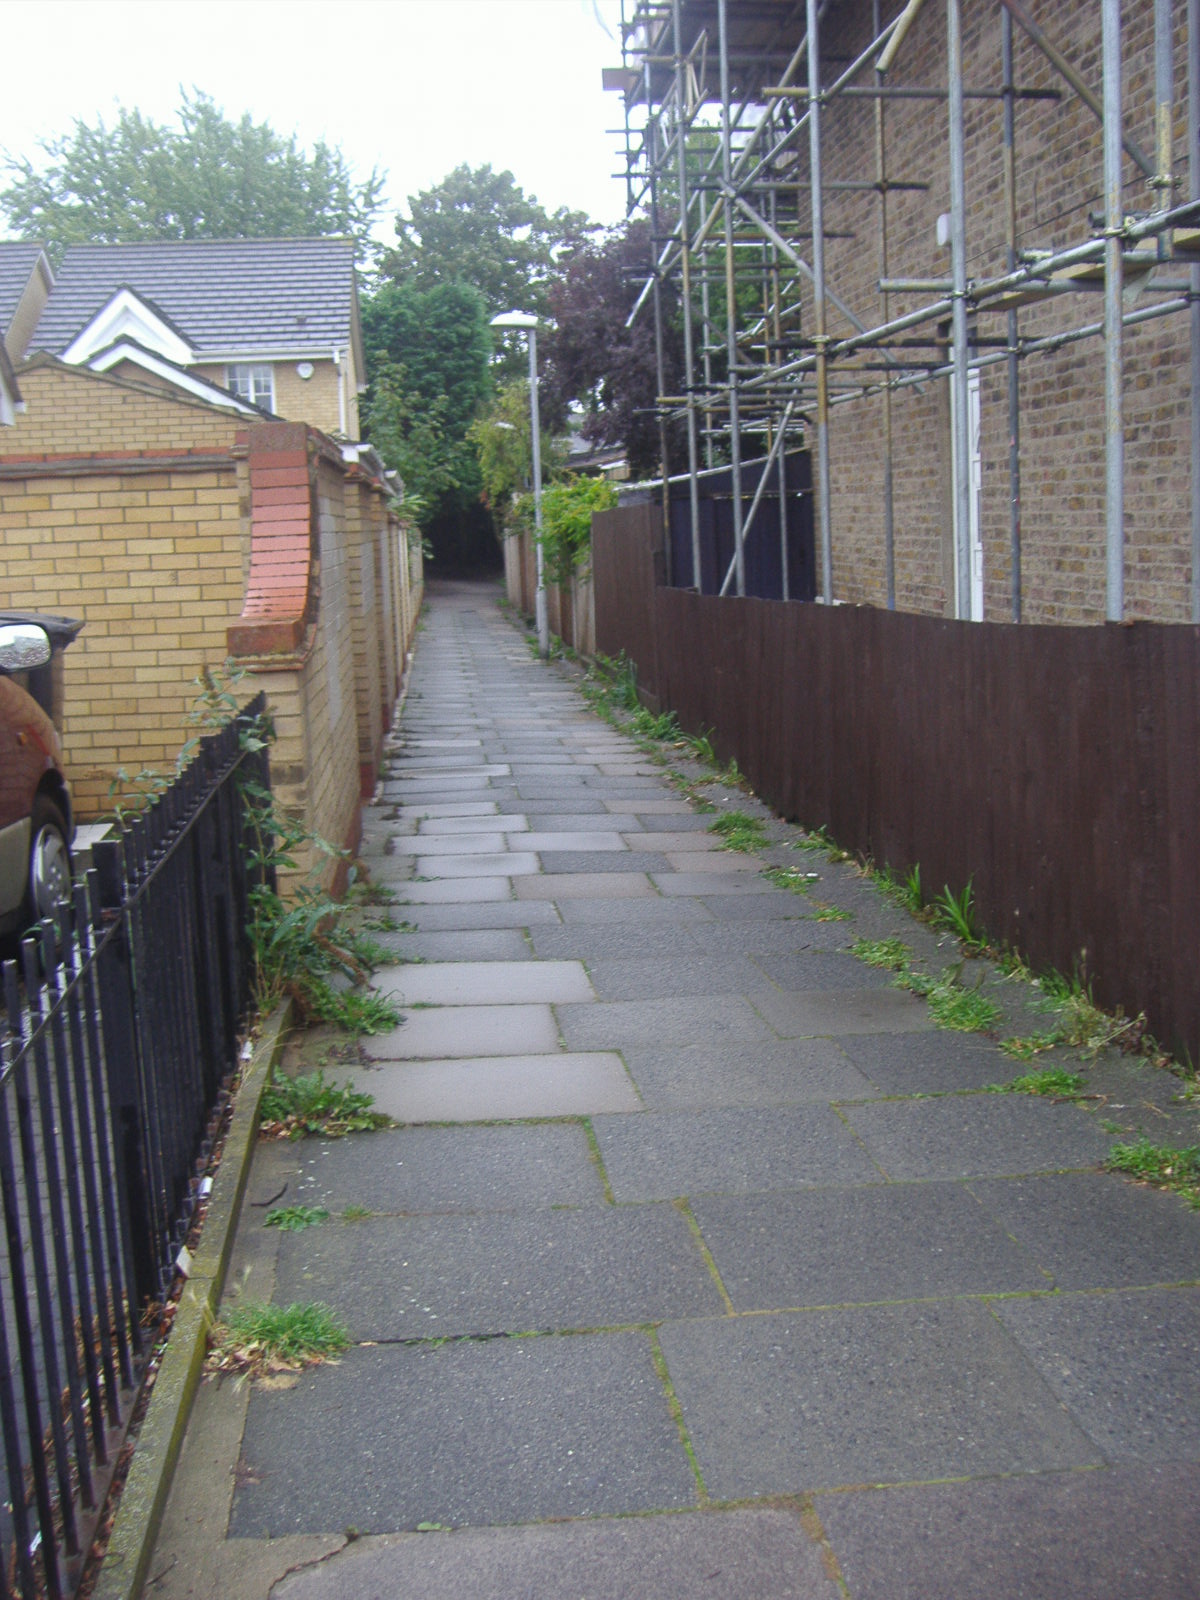 a brick path lined with scaffolding and scaffolding